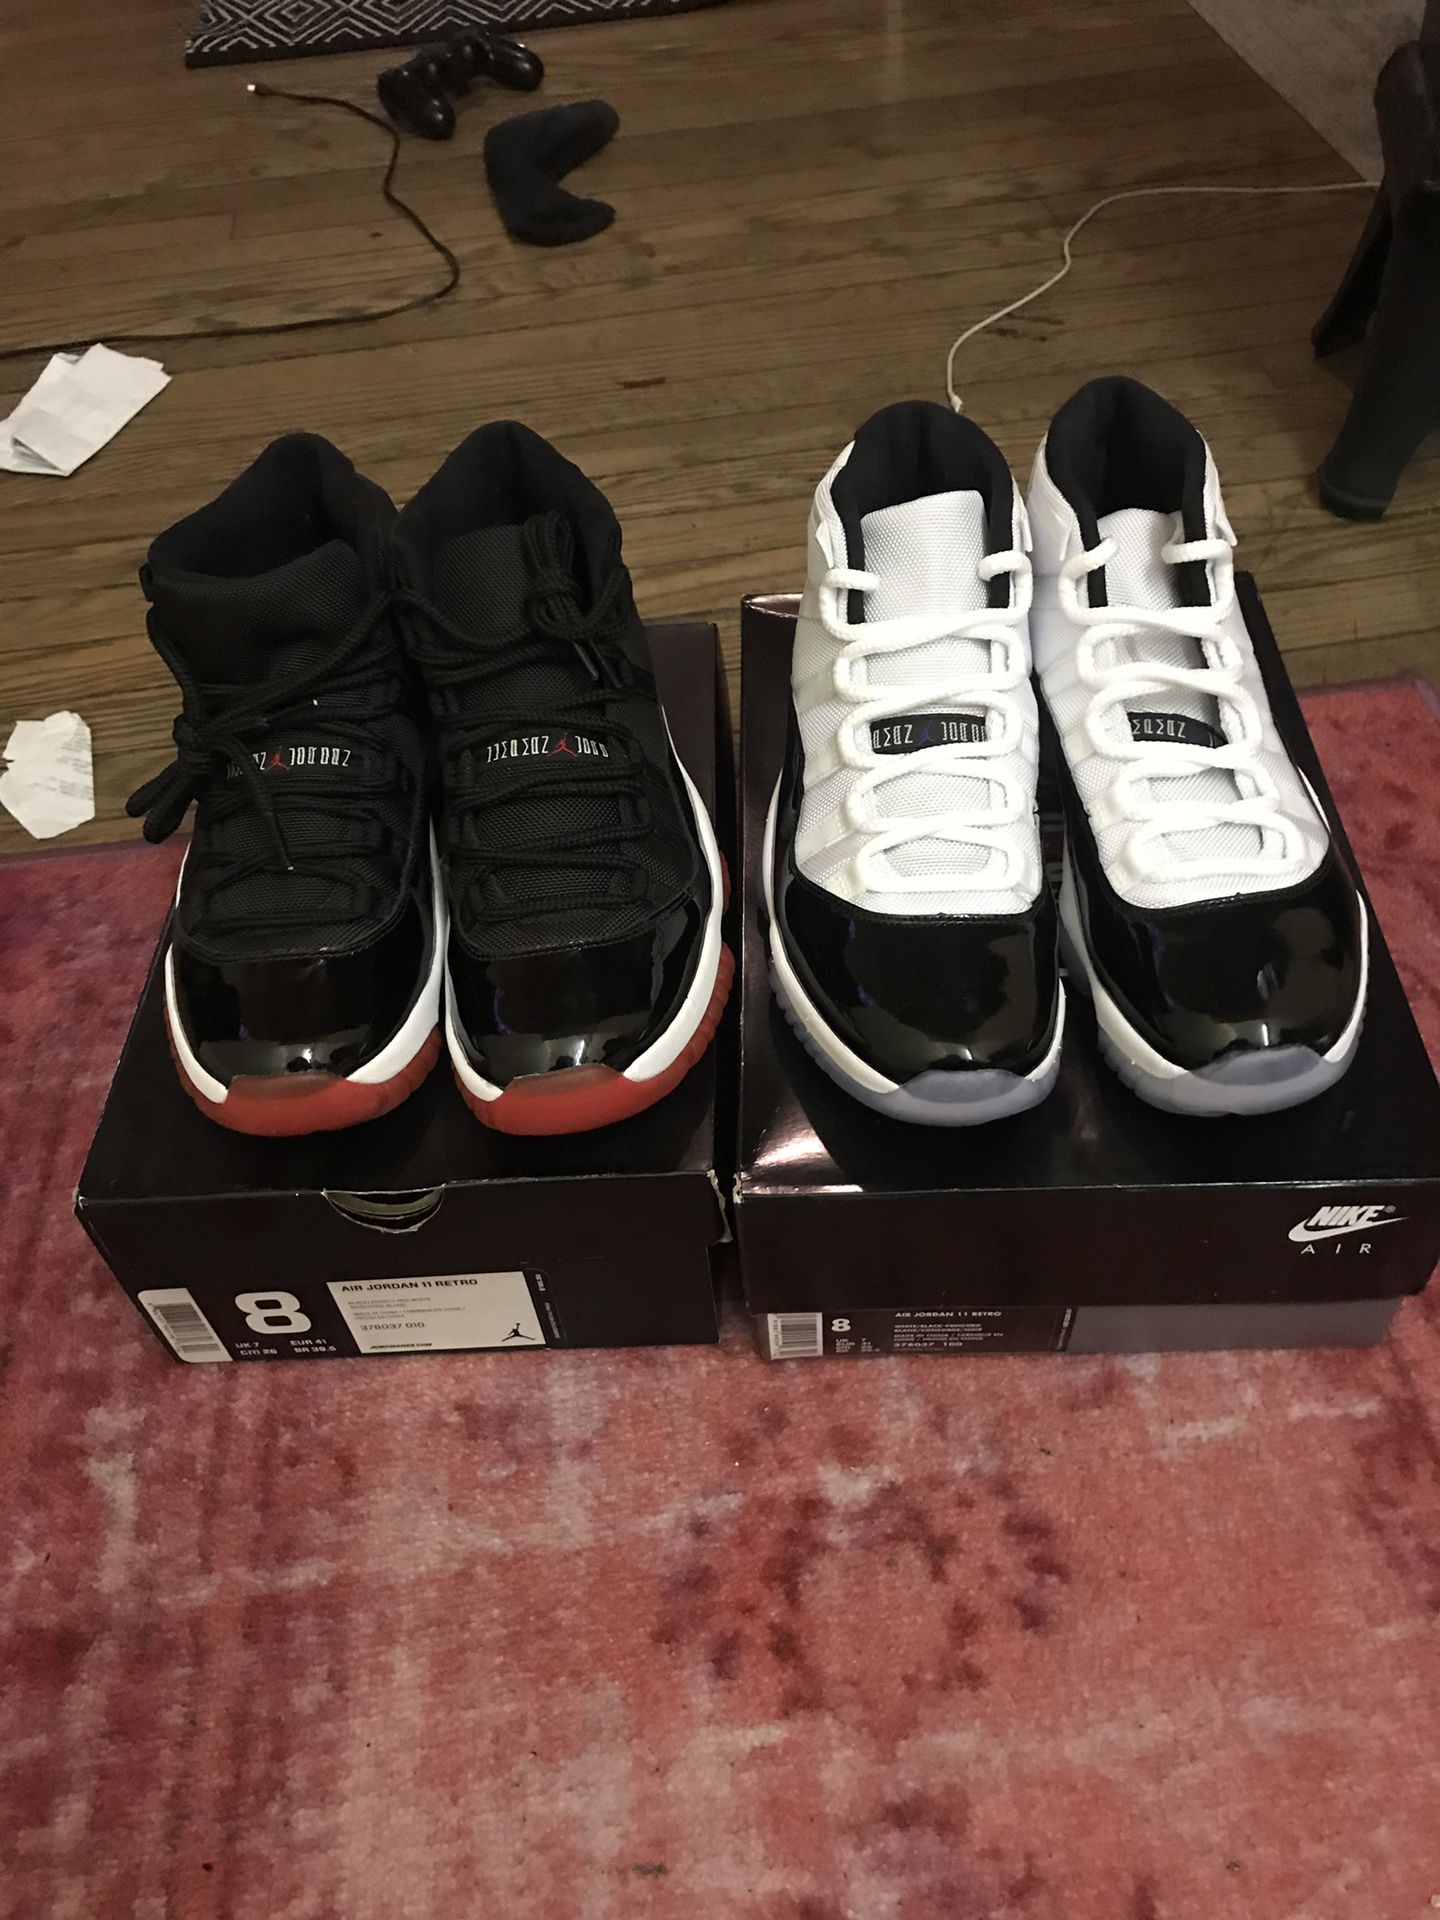 2008 CDP Bred 11 and 2018 Concord 11 both size 8